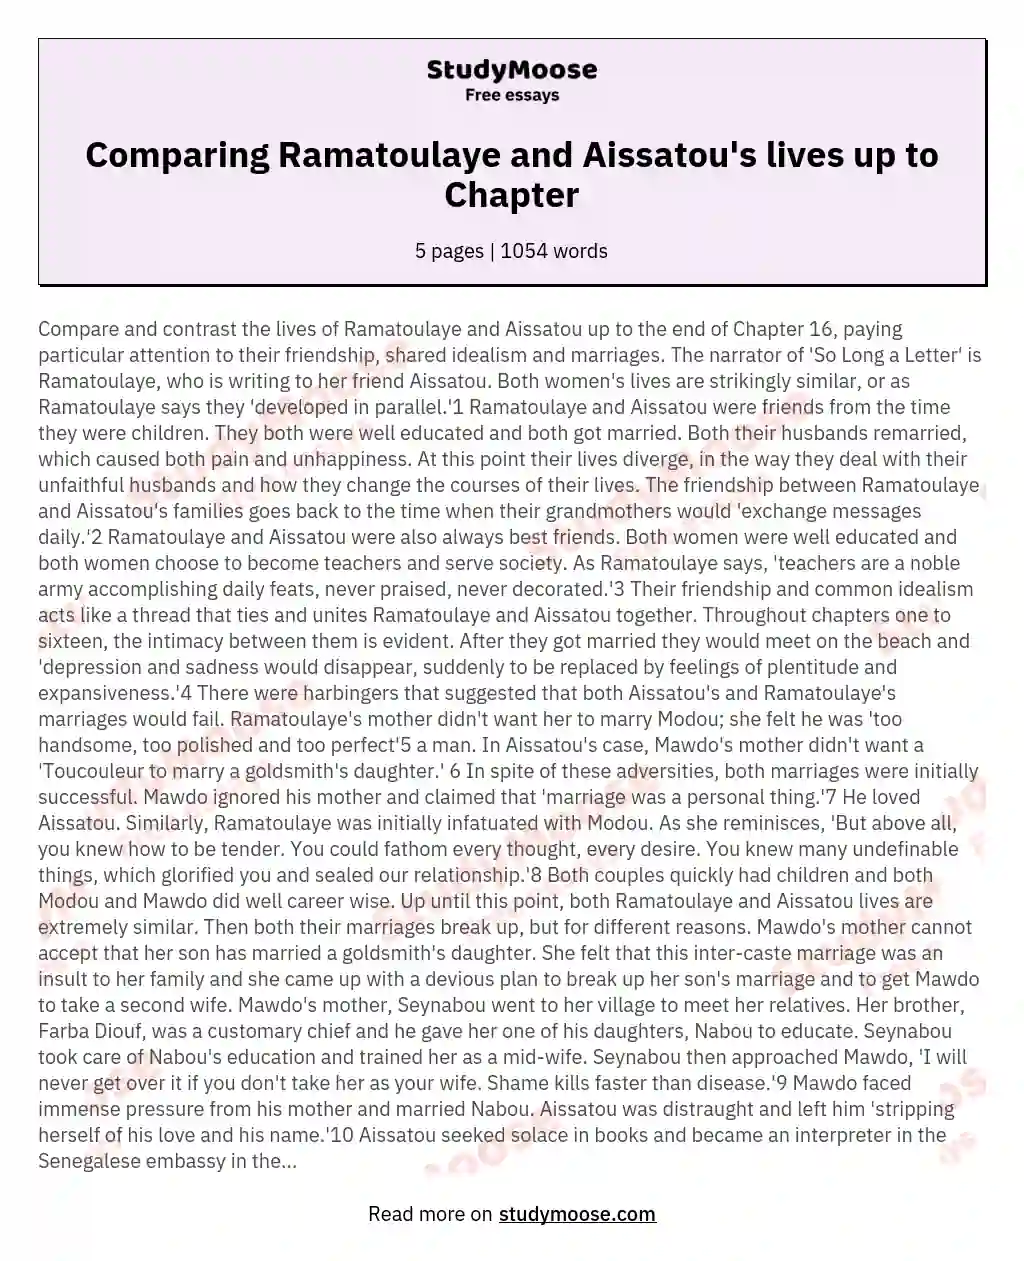 Compare and contrast the lives of Ramatoulaye and Aissatou up to the end of Chapter 16